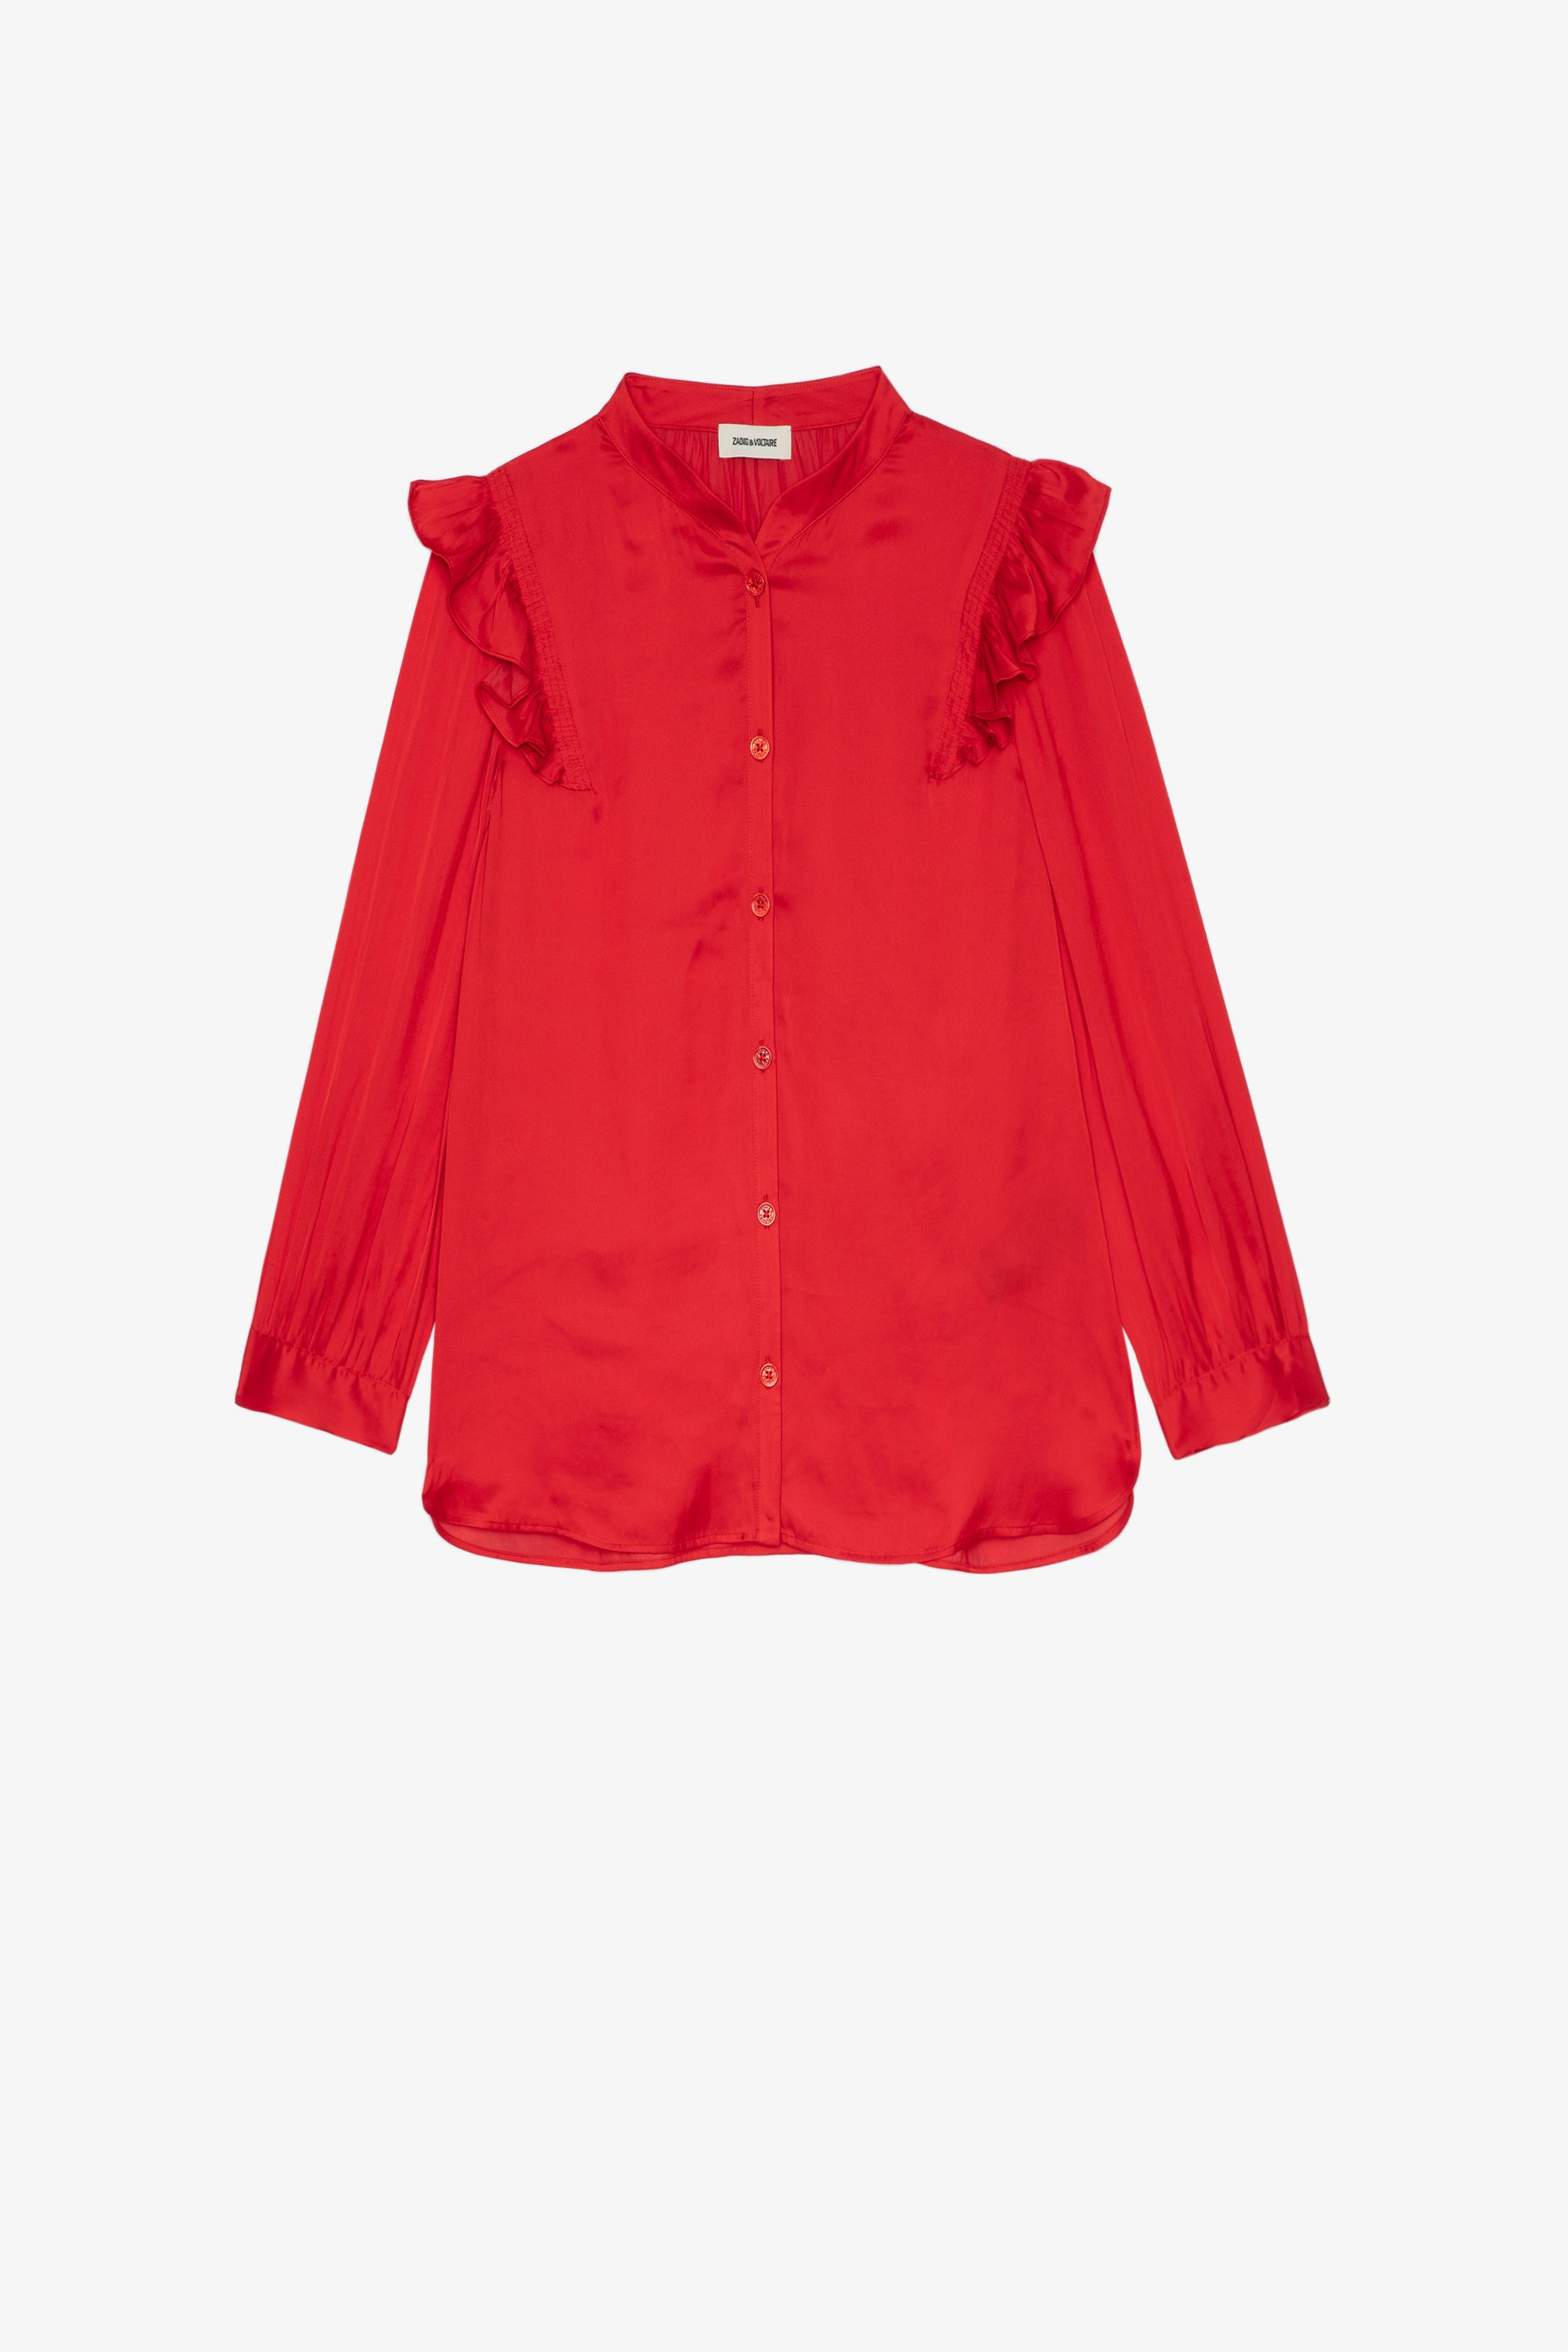 Tygg Satin シャツ Women’s red satiny shirt with long sleeves and ruffle details